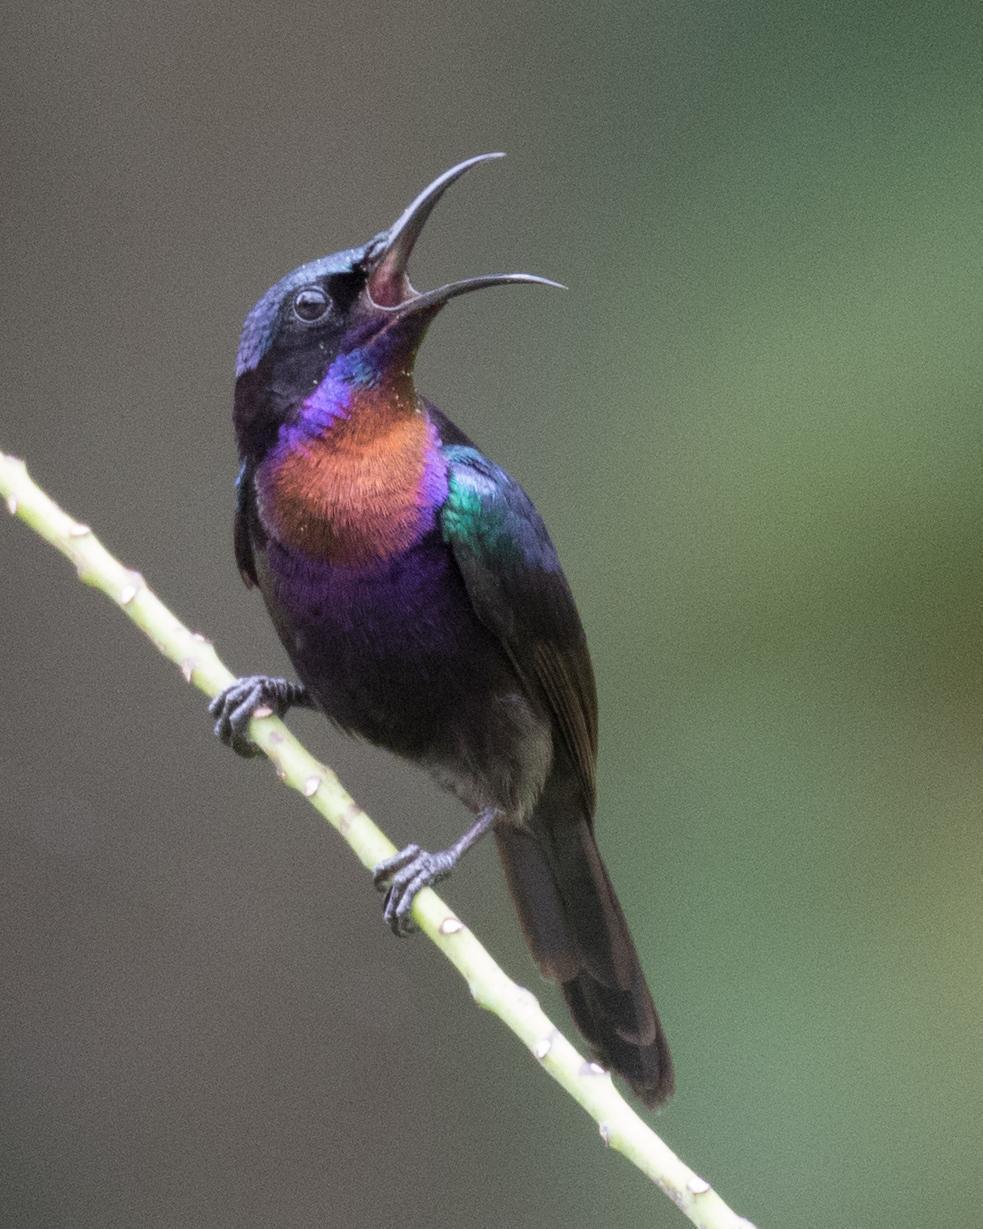 Copper-throated Sunbird Photo by Robert Lewis